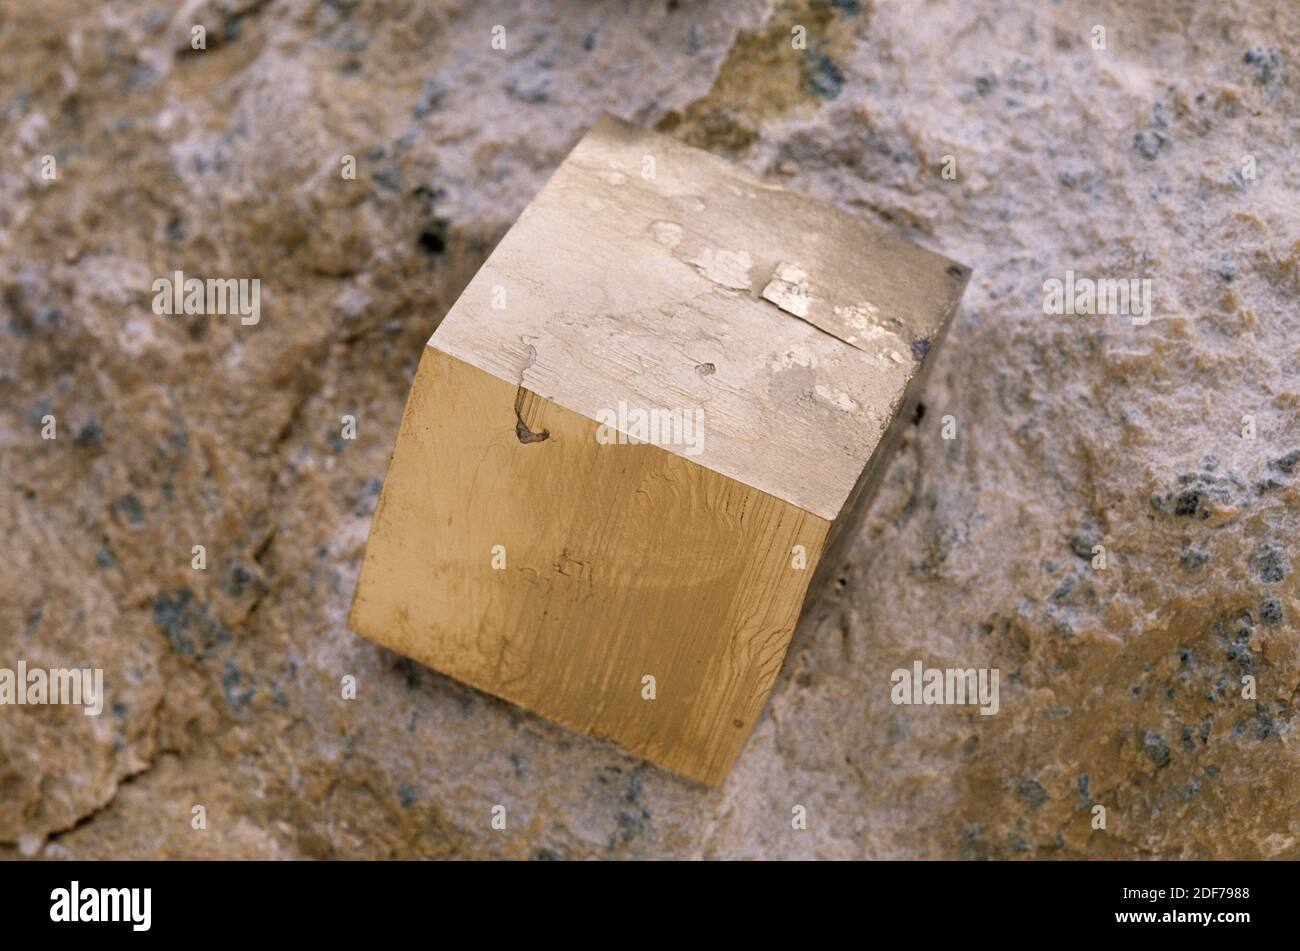 Pyrite or iron pyrite is an iron sulfide mineral. Cubic crystal on matrix. Stock Photo